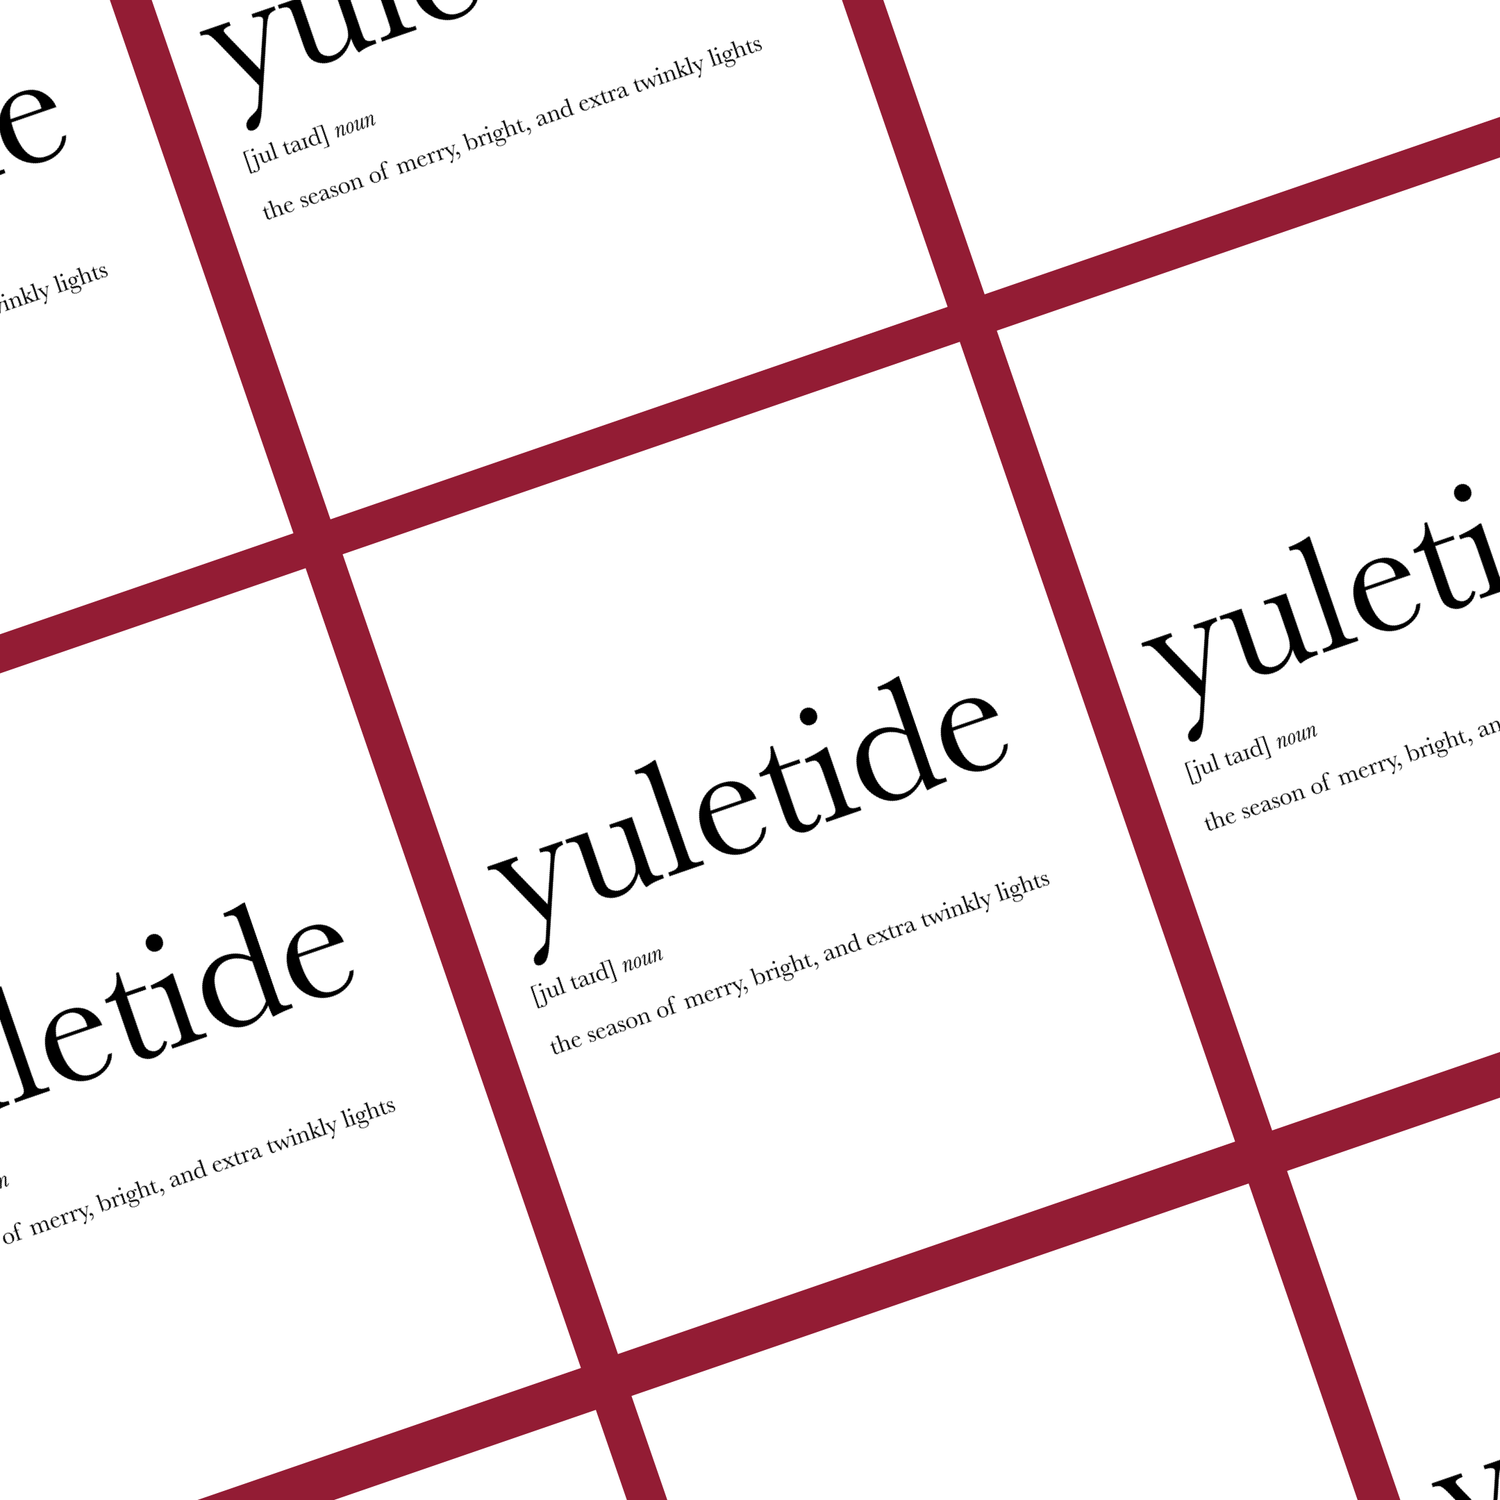 Yuletide Definition Christmas Greeting Card | Footnotes Paper